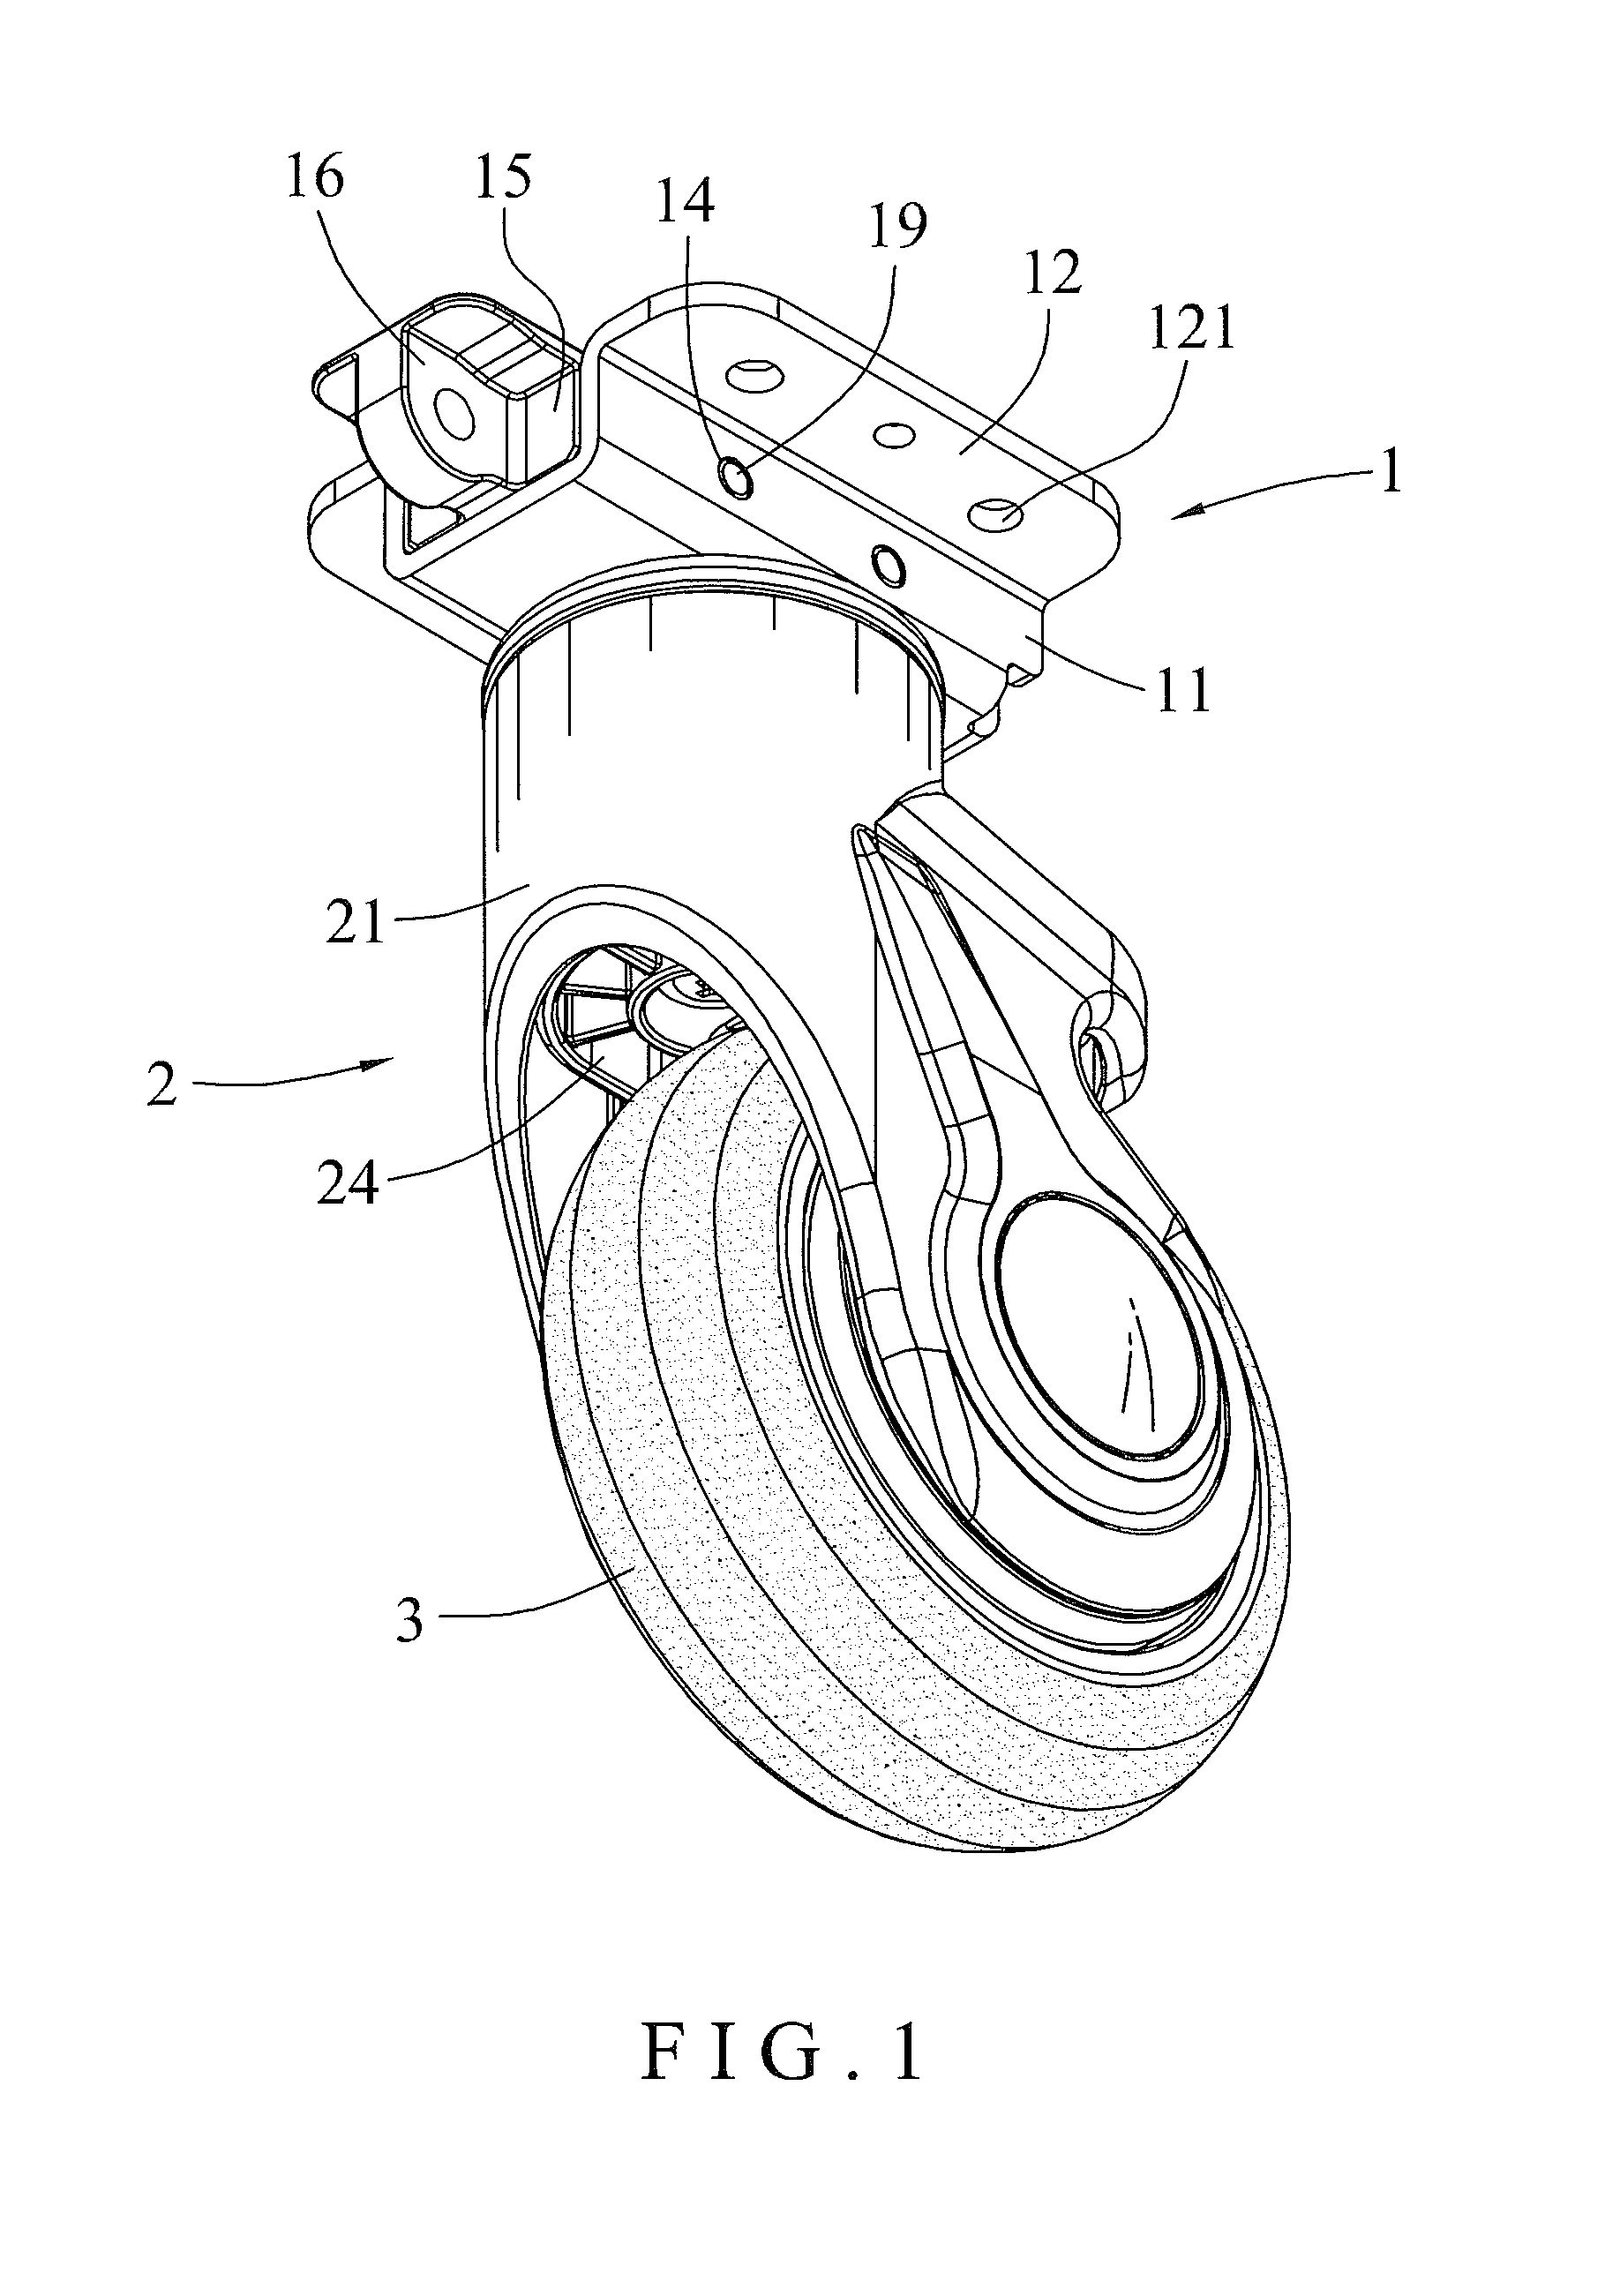 Combination castor brake system whose castor assemblies are braked and positioned simultaneously